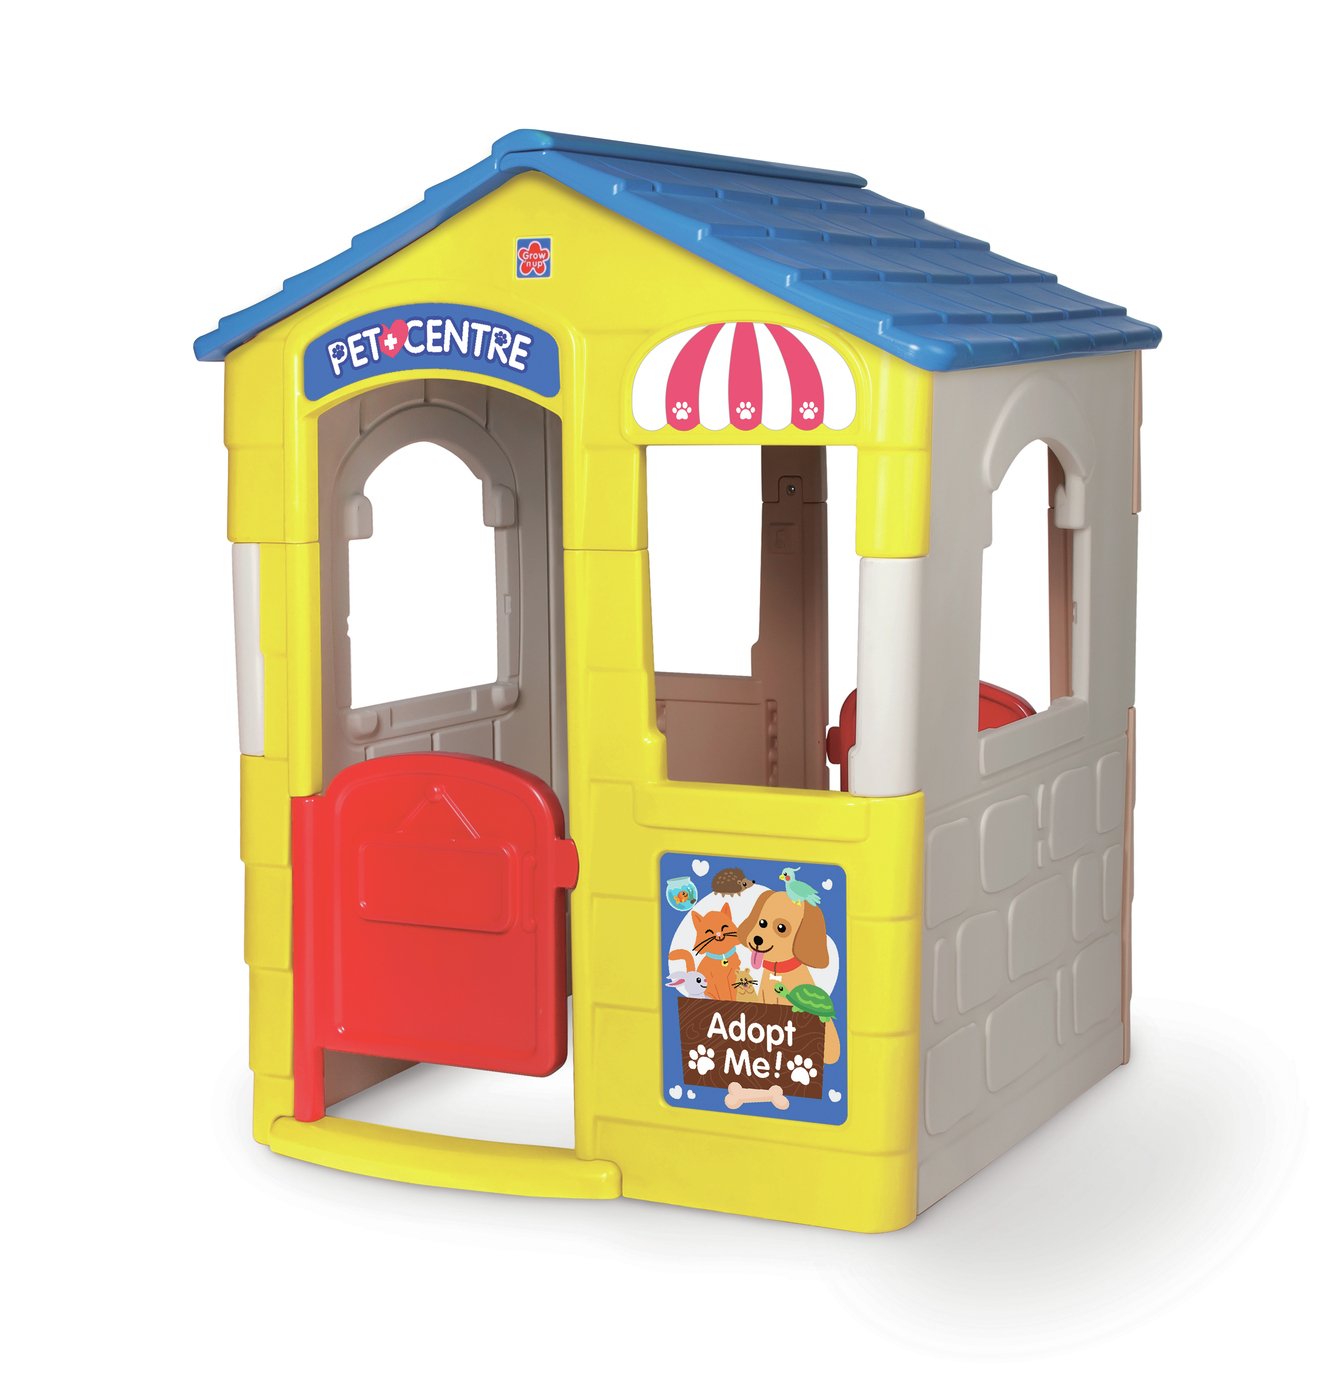 Grow'n Up 2 in 1 interchangeable Playhouse